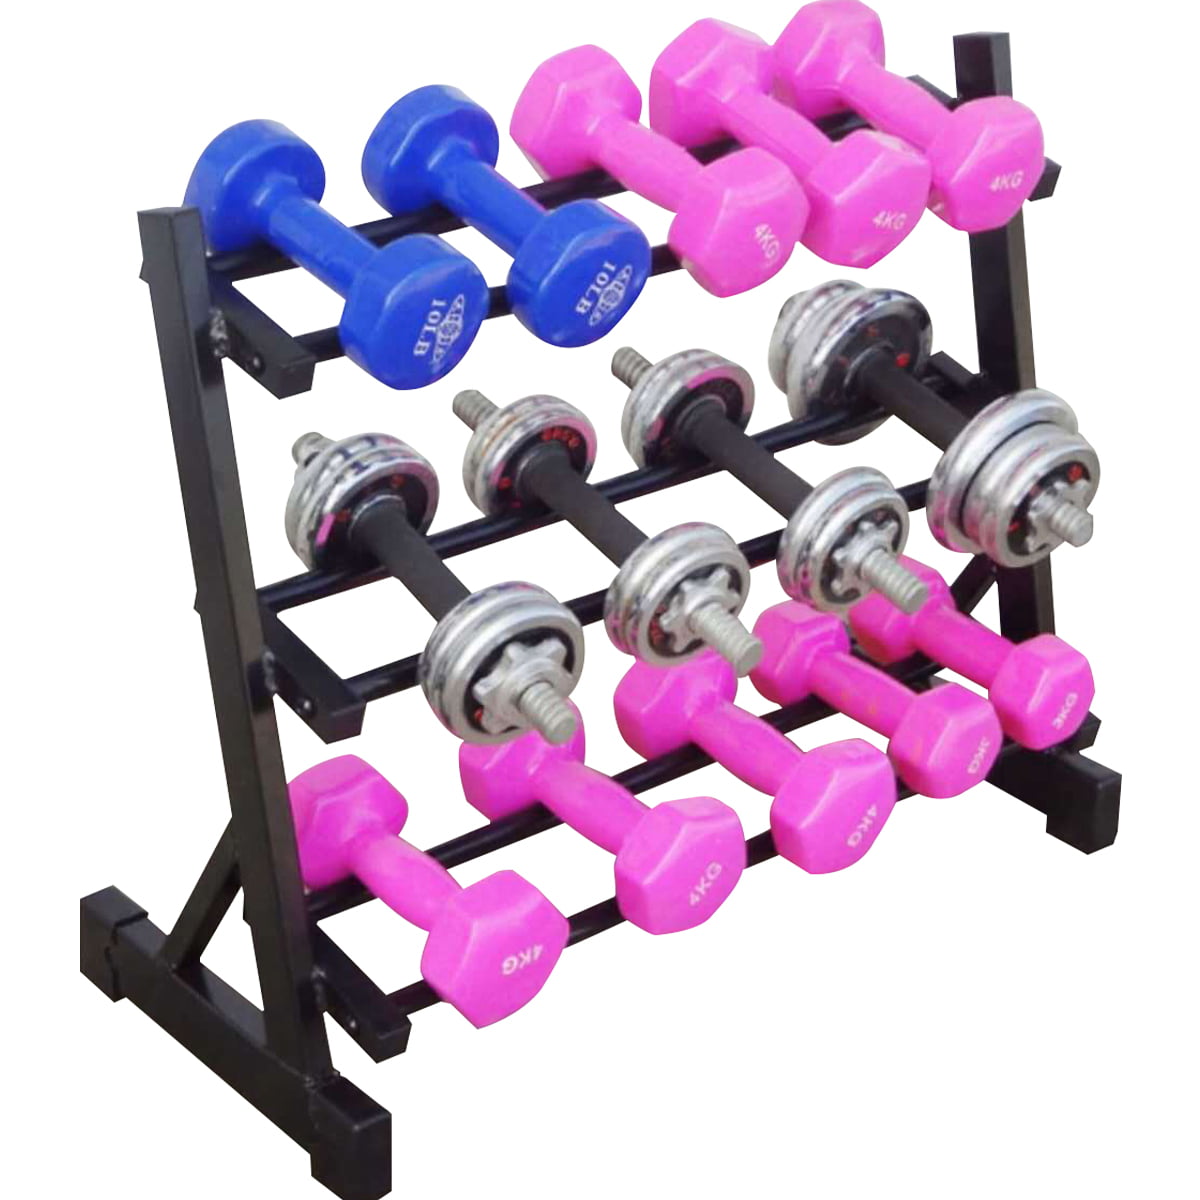 Latest Model Dripex 3 Tier/2 Tier Heavy Duty Dumbbell Rack Home Gym Weight Rack Storage Stand Rack Only Weight Sets/Kettlebell/Weight Plates/Holder